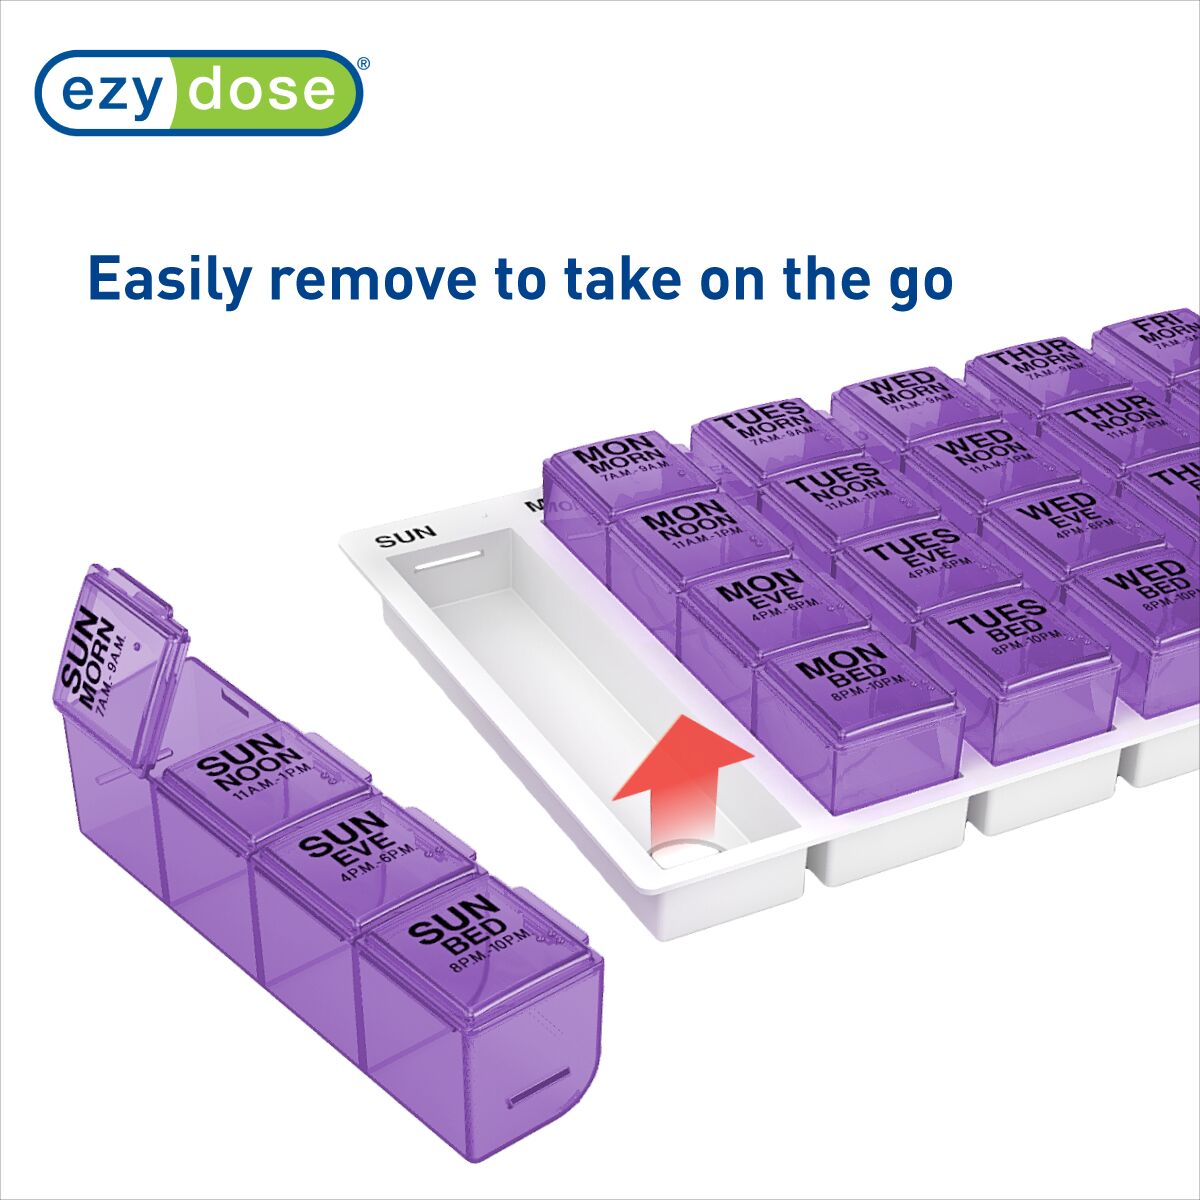 Easily remove the daily compartment to take on the go with you